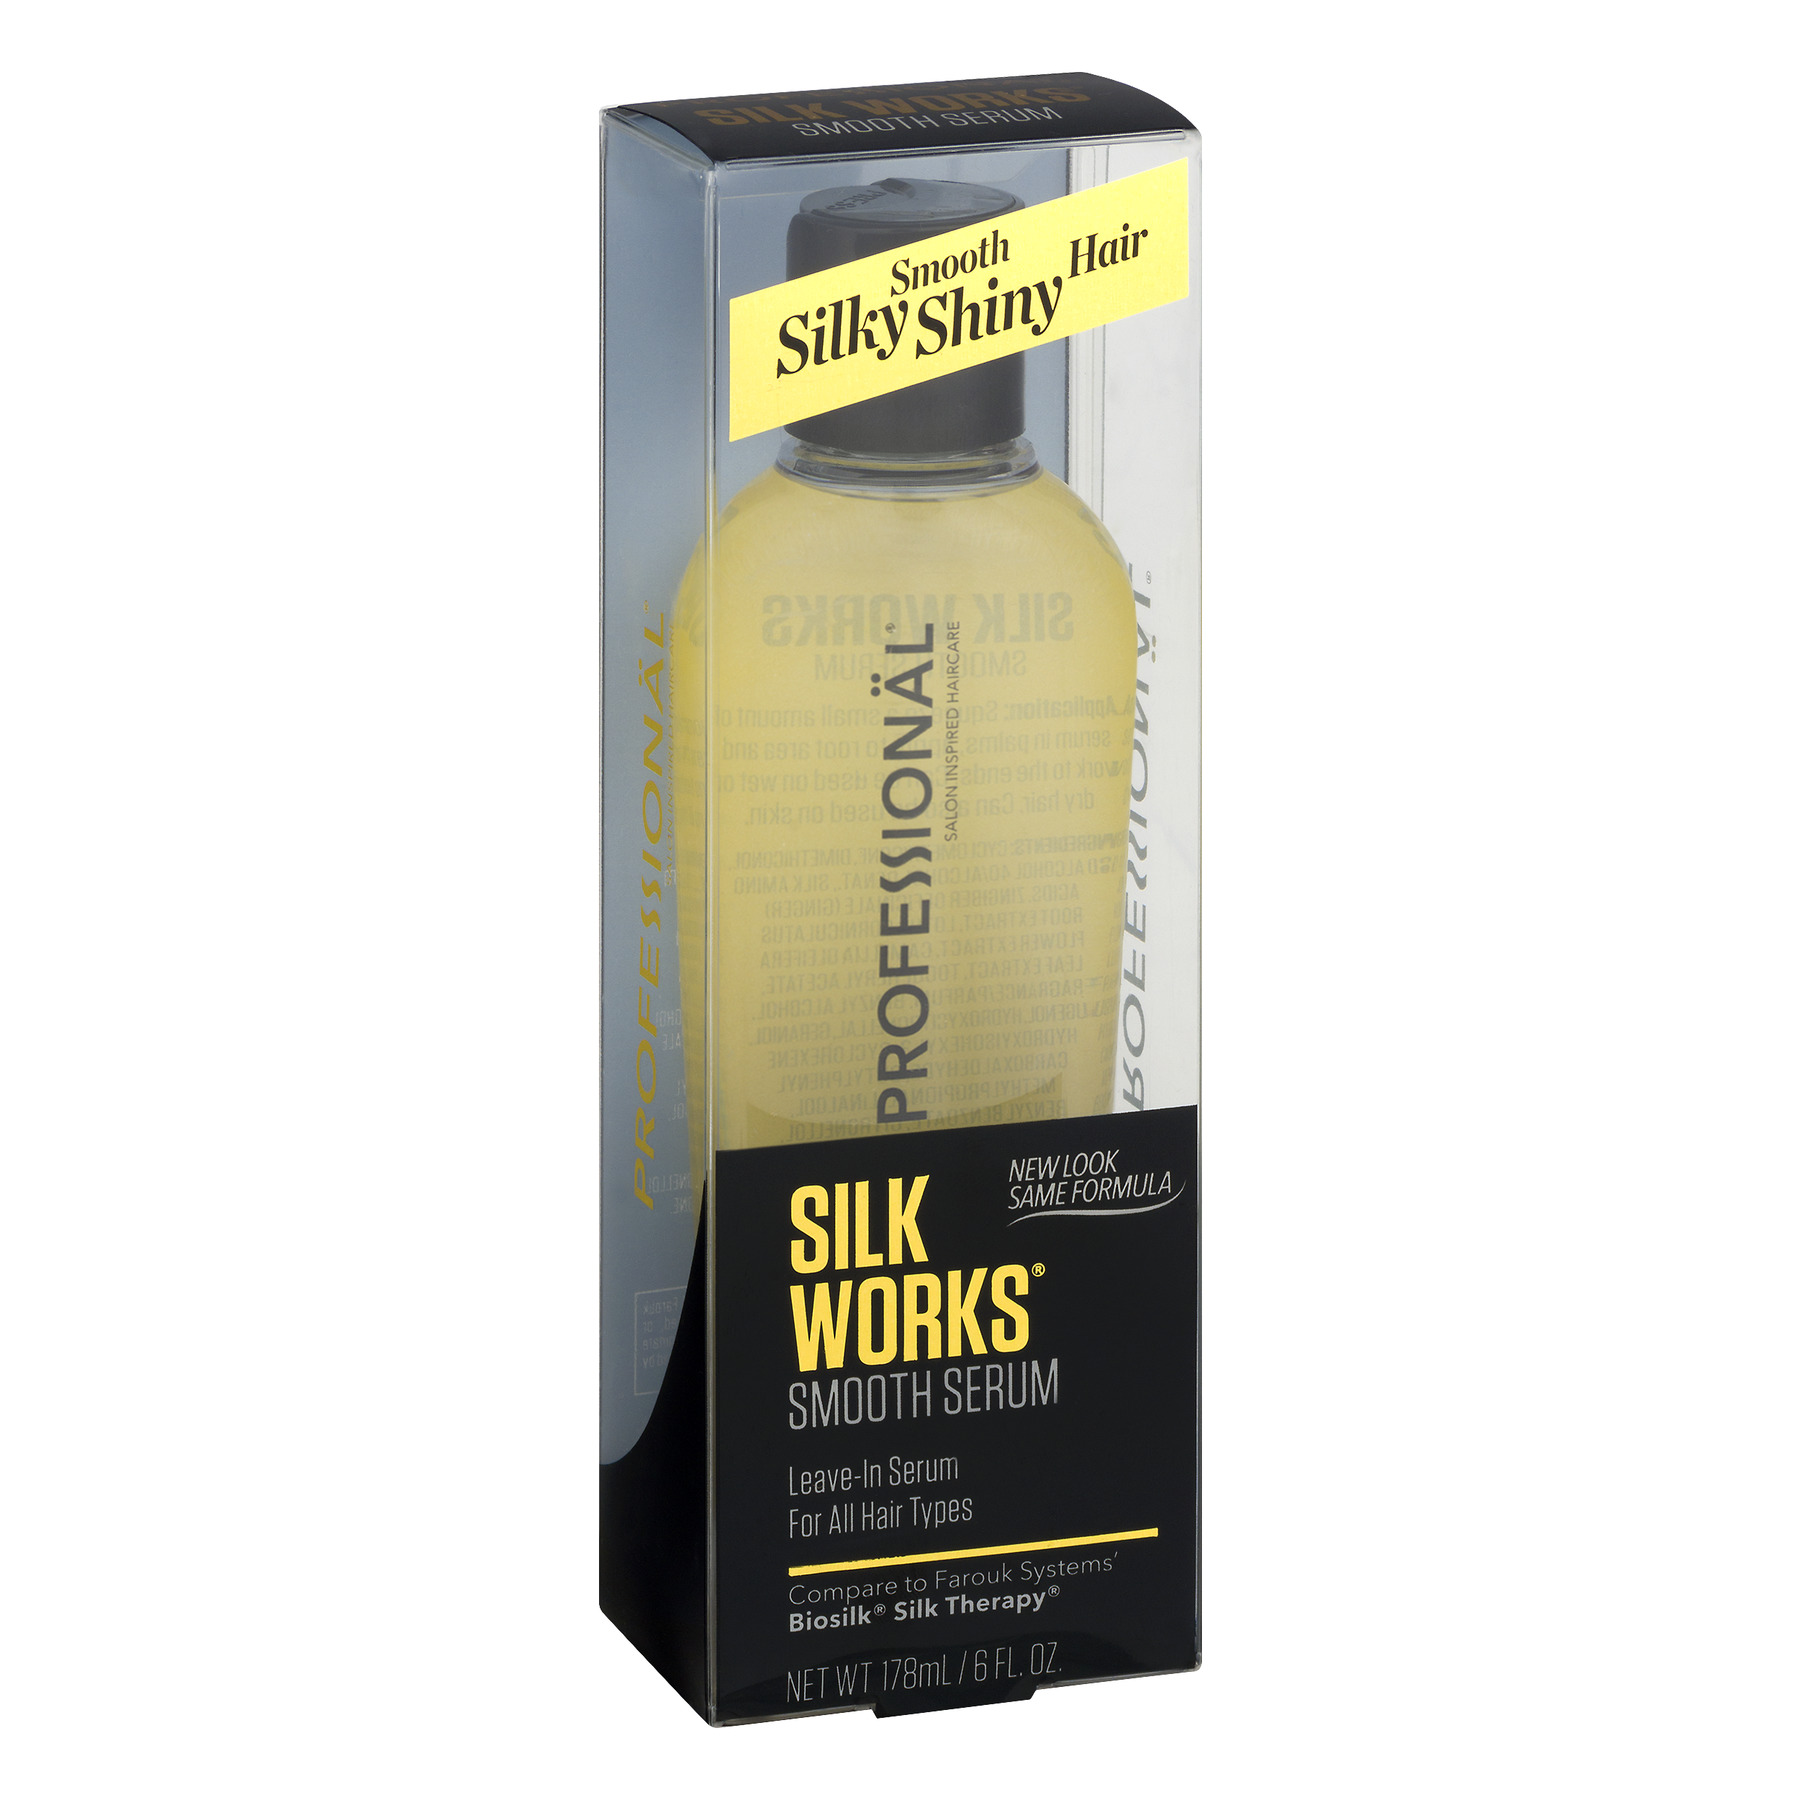 Silk Works Smooth Serum For All Hair, Silky Hair Serum Smoothing Treatment, 6 Oz - image 2 of 5